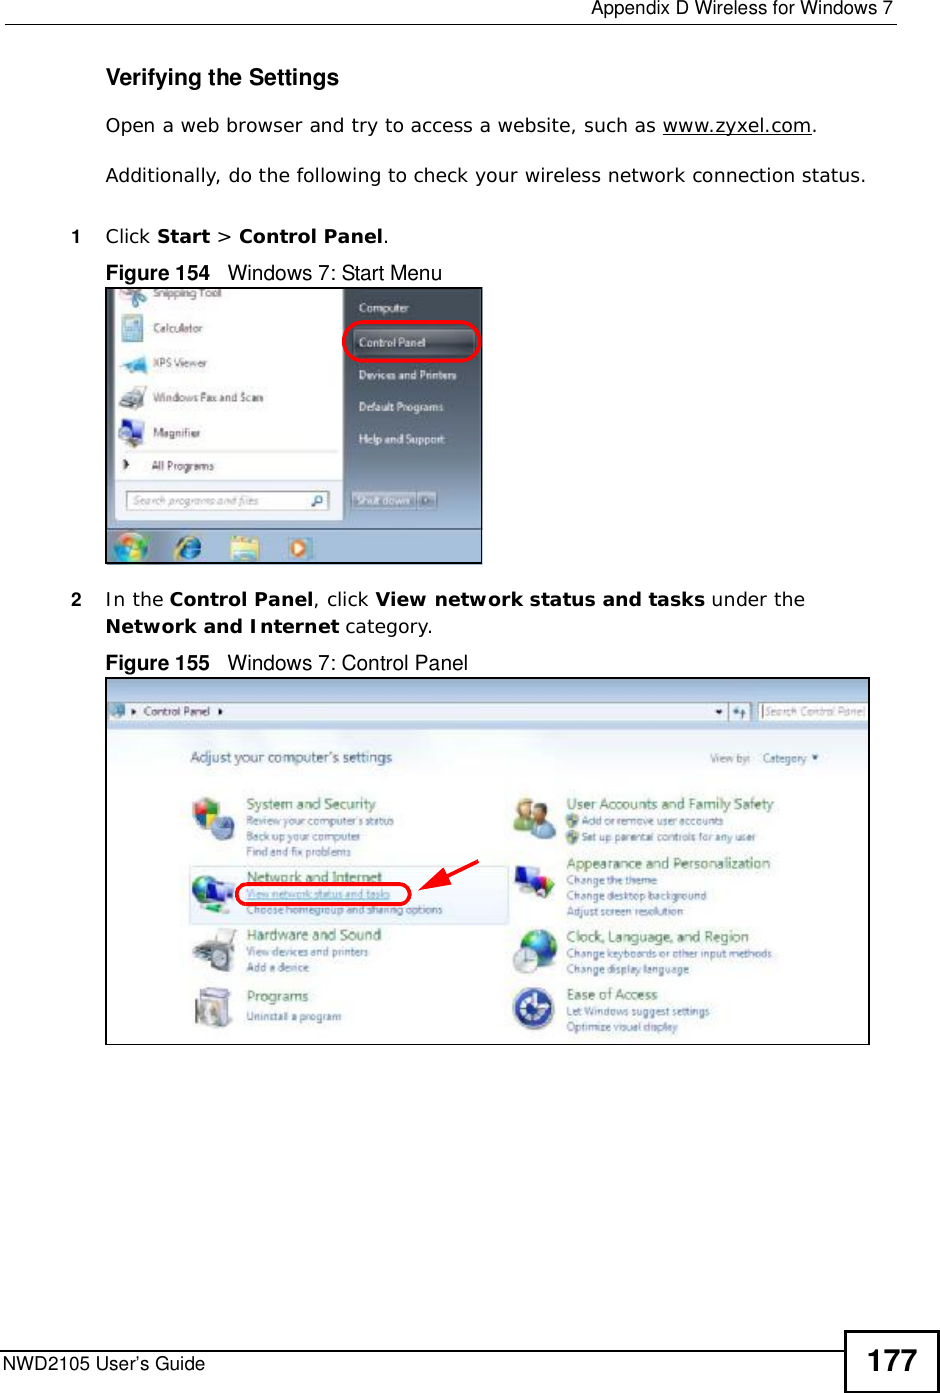  Appendix DWireless for Windows 7NWD2105 User’s Guide 177Verifying the SettingsOpen a web browser and try to access a website, such as www.zyxel.com. Additionally, do the following to check your wireless network connection status.1Click Start &gt; Control Panel.Figure 154   Windows 7: Start Menu2In the Control Panel, click View network status and tasks under the Network and Internet category.Figure 155   Windows 7: Control Panel